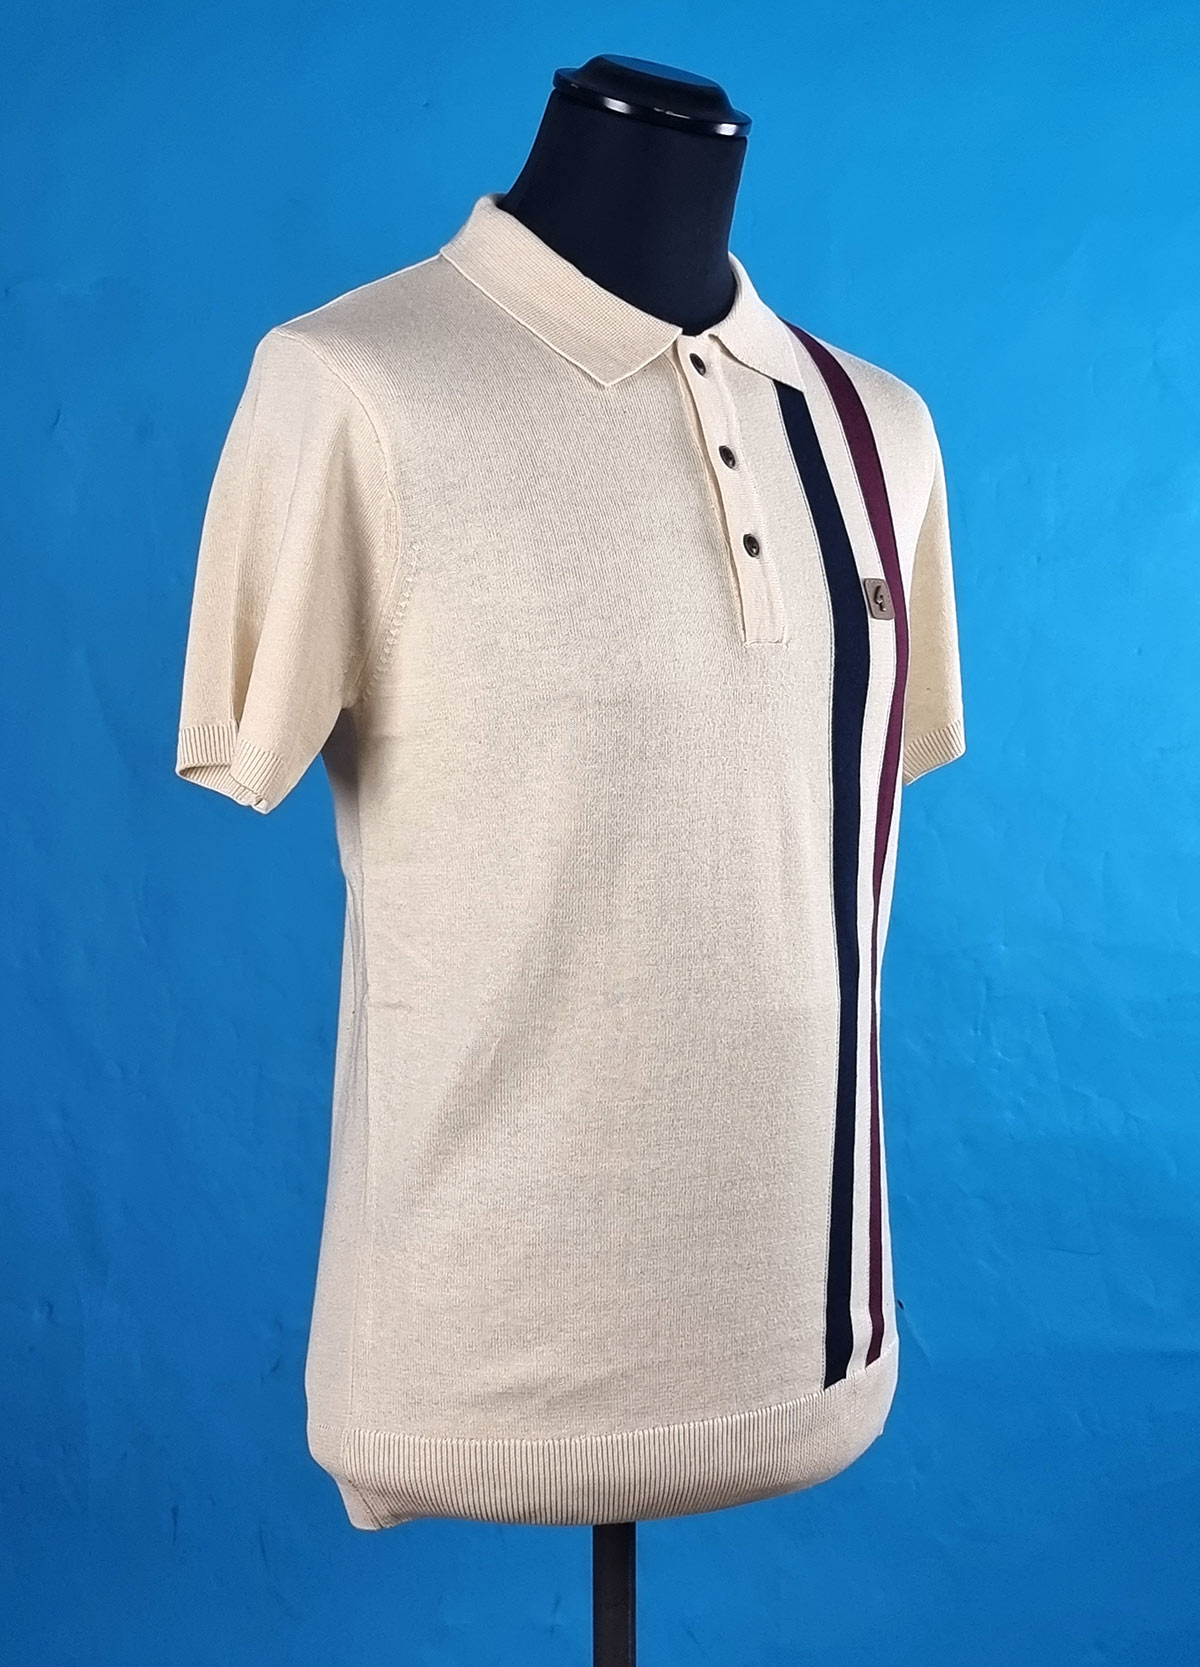 Gabicci Como Oat – 60s 70s Casual Style Top With Mod Stripe – Mod Shoes